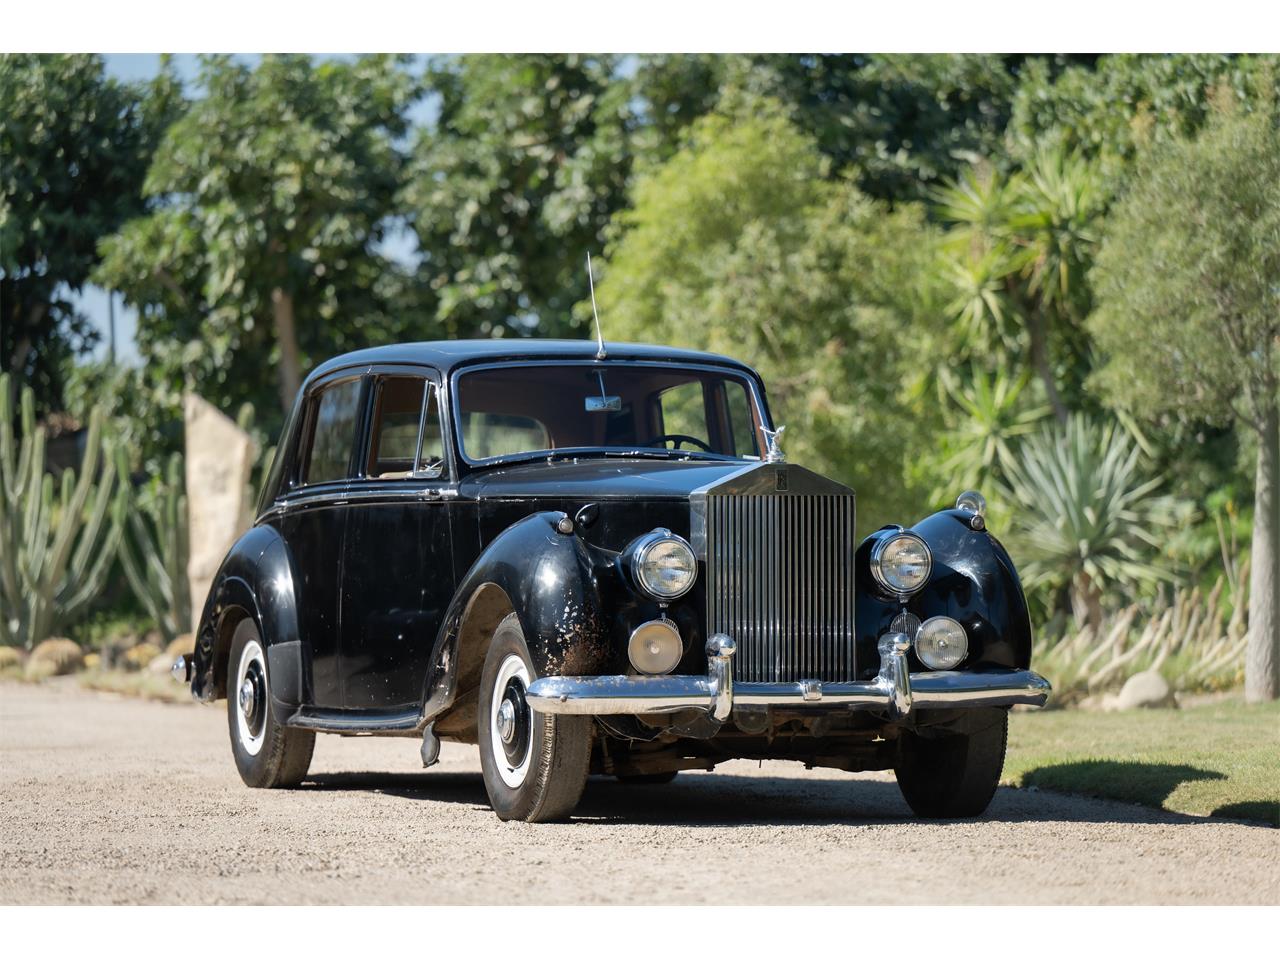 For Sale: 1953 Rolls-Royce Silver Dawn in Astoria, New York for sale in Astoria, NY